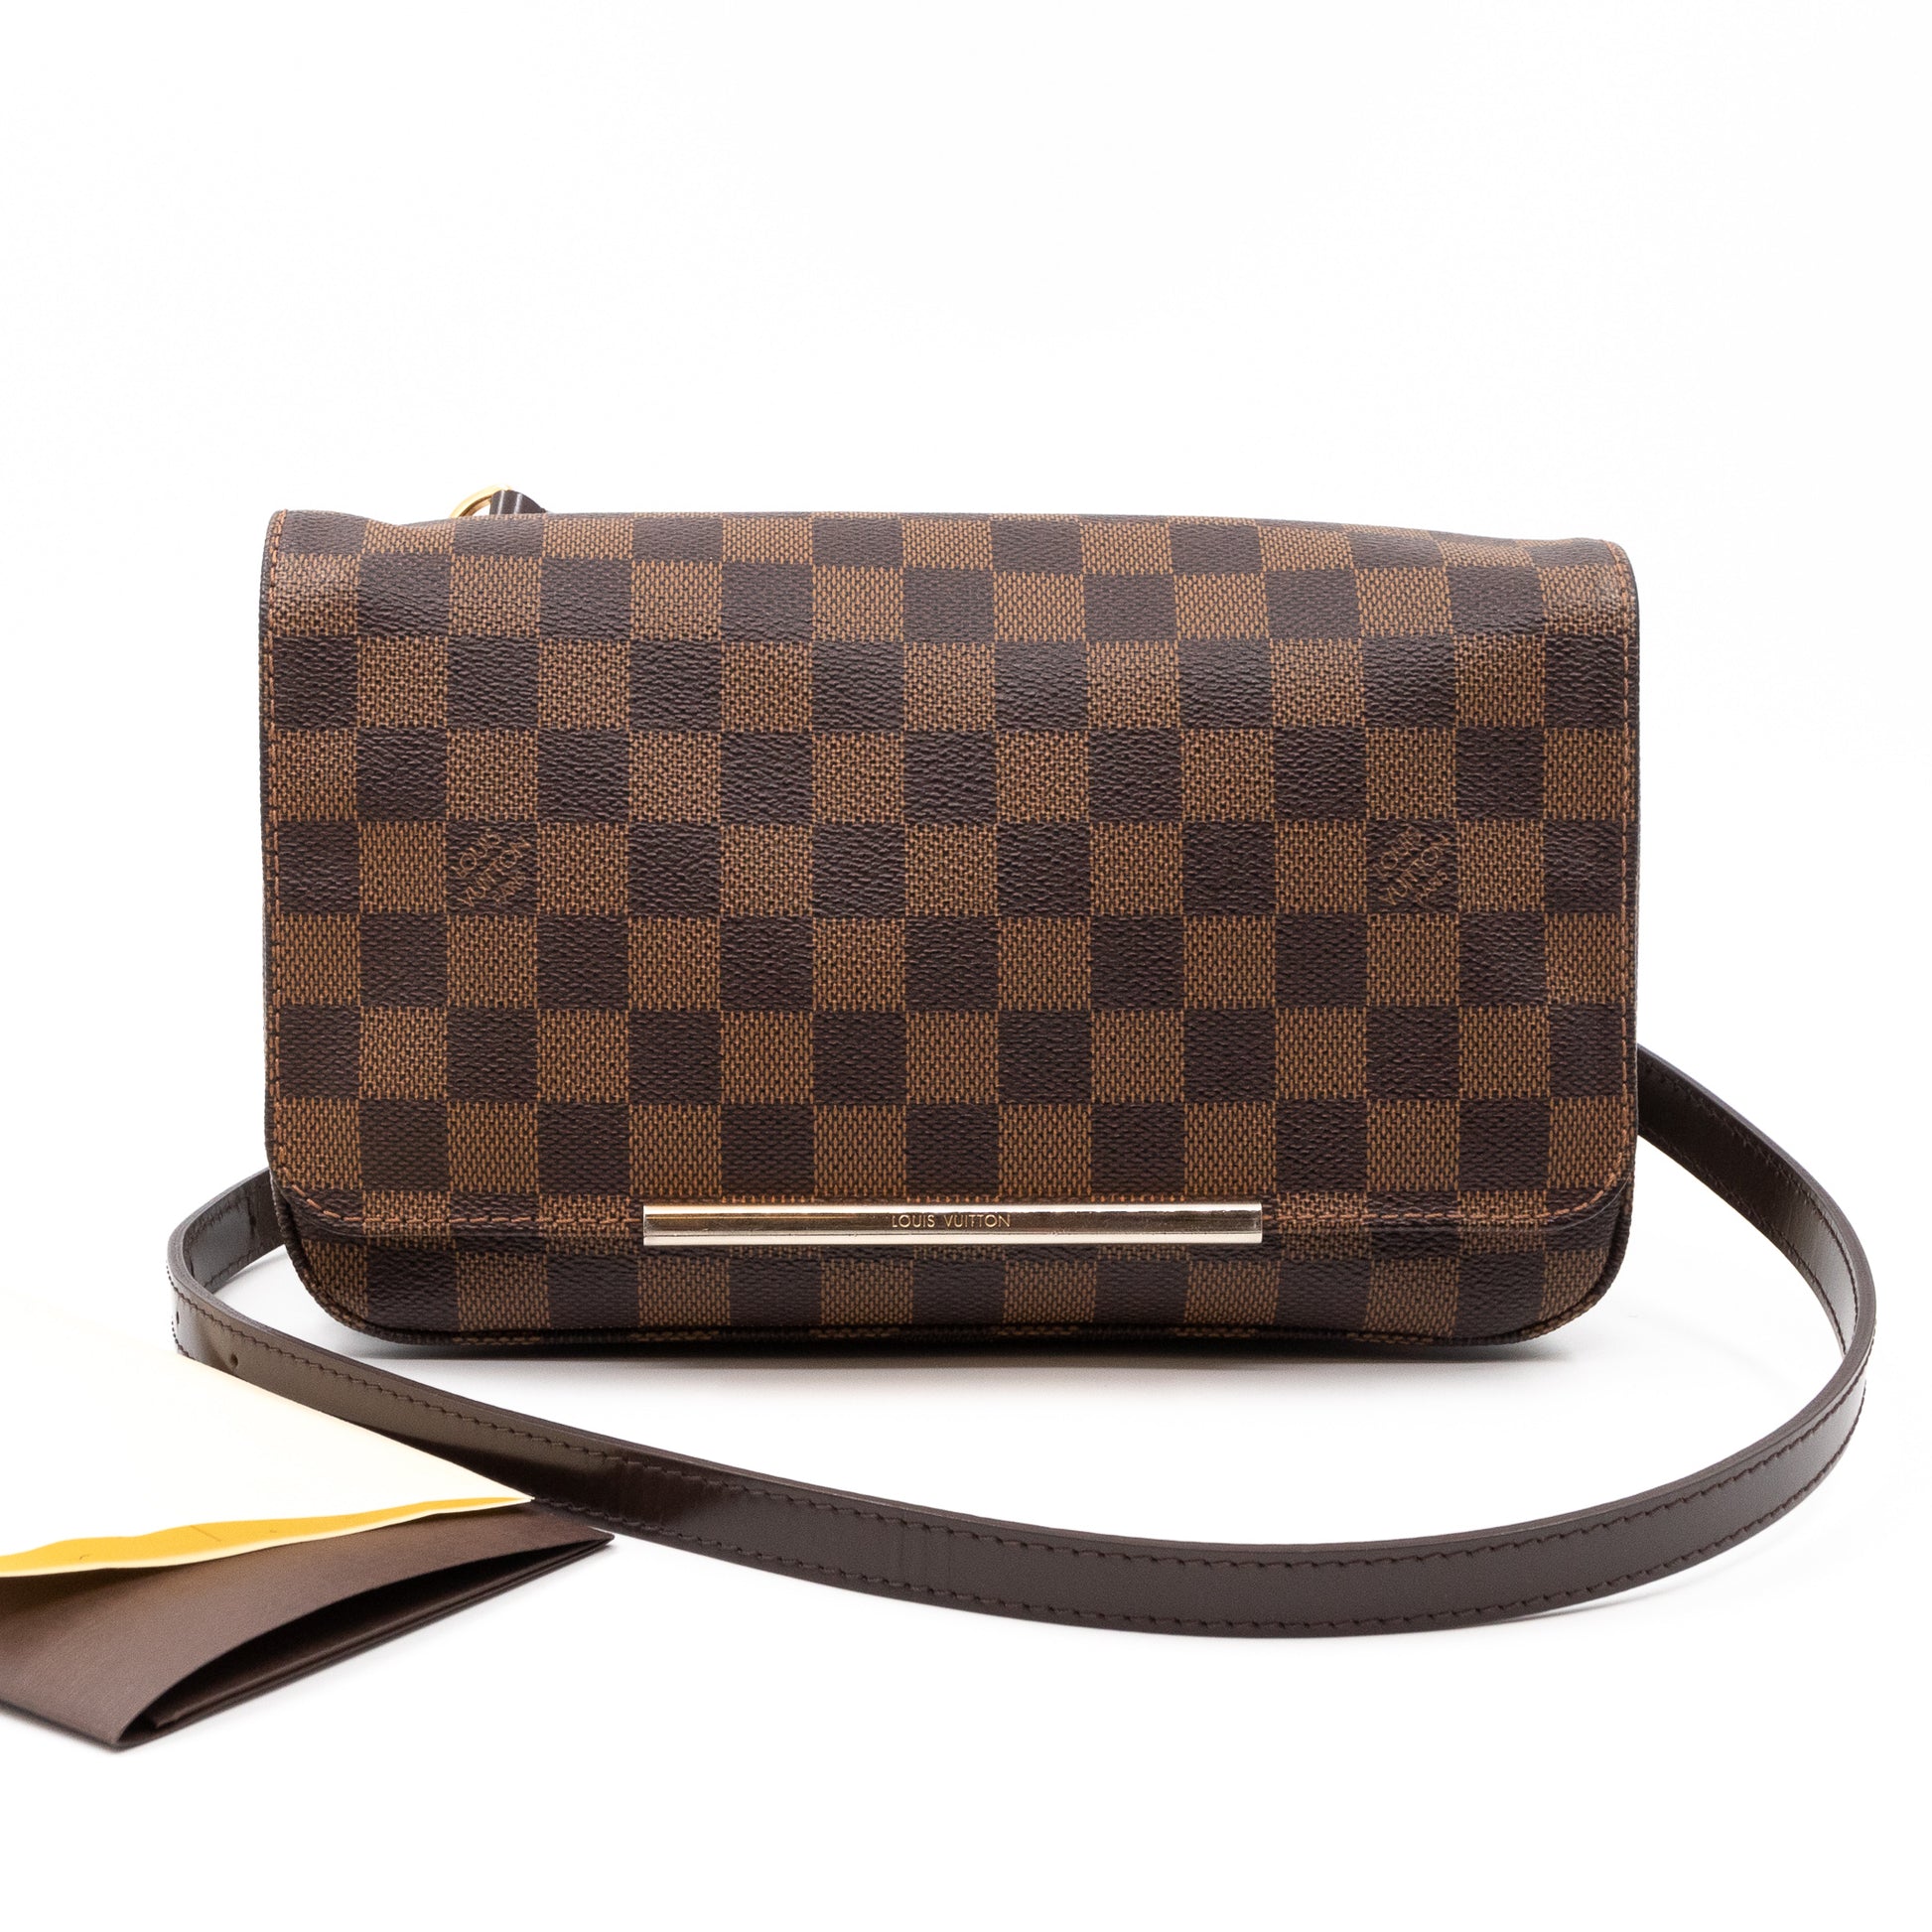 Authenticated Used Louis Vuitton Hoxton PM Damier Shoulder Bag Women's  Brown Crossbody N41257 